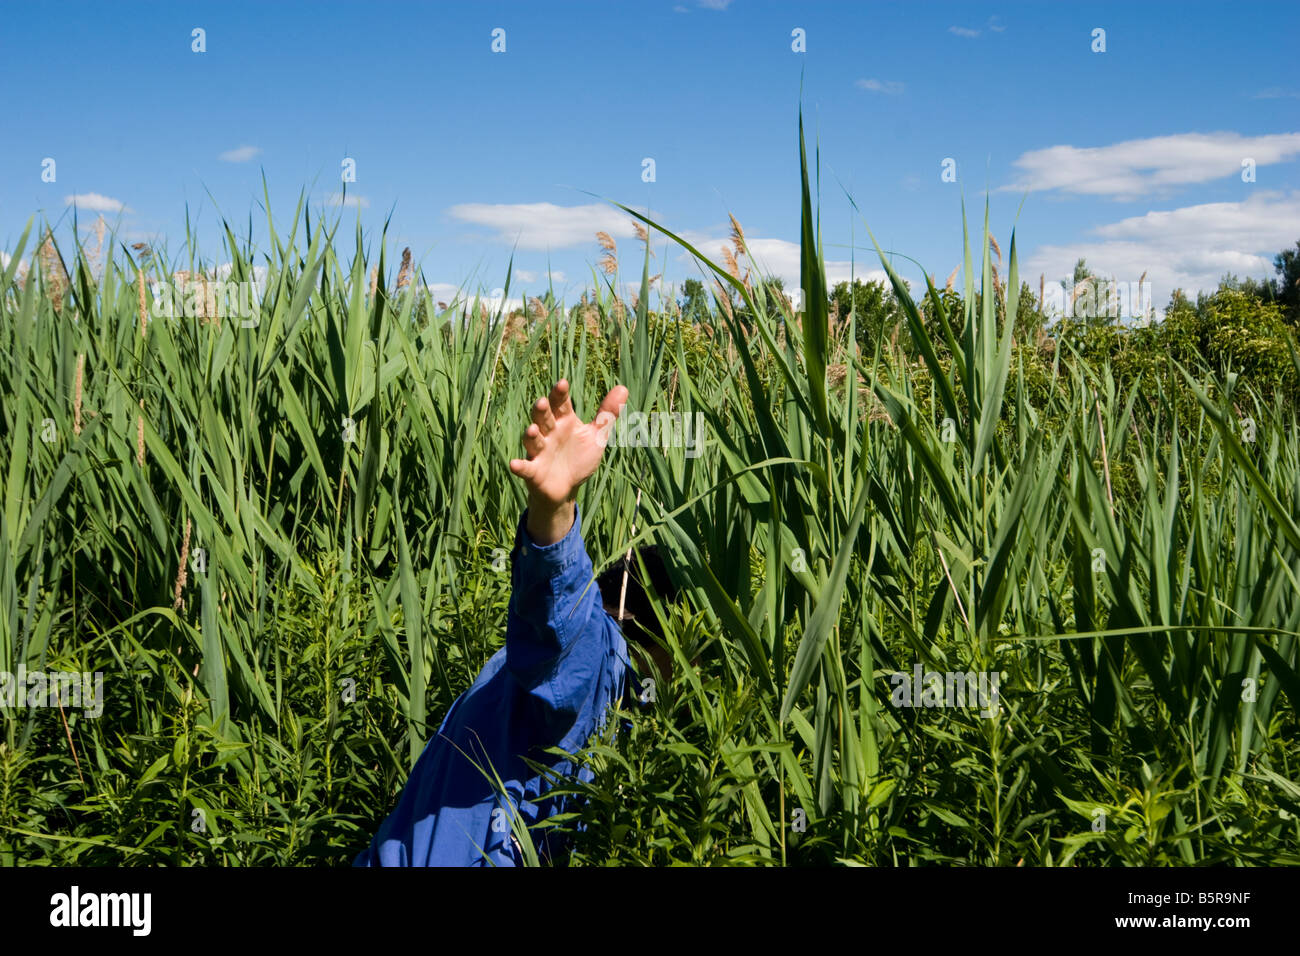 Man walking into a field of very tall grass MODEL RELEASED Stock Photo